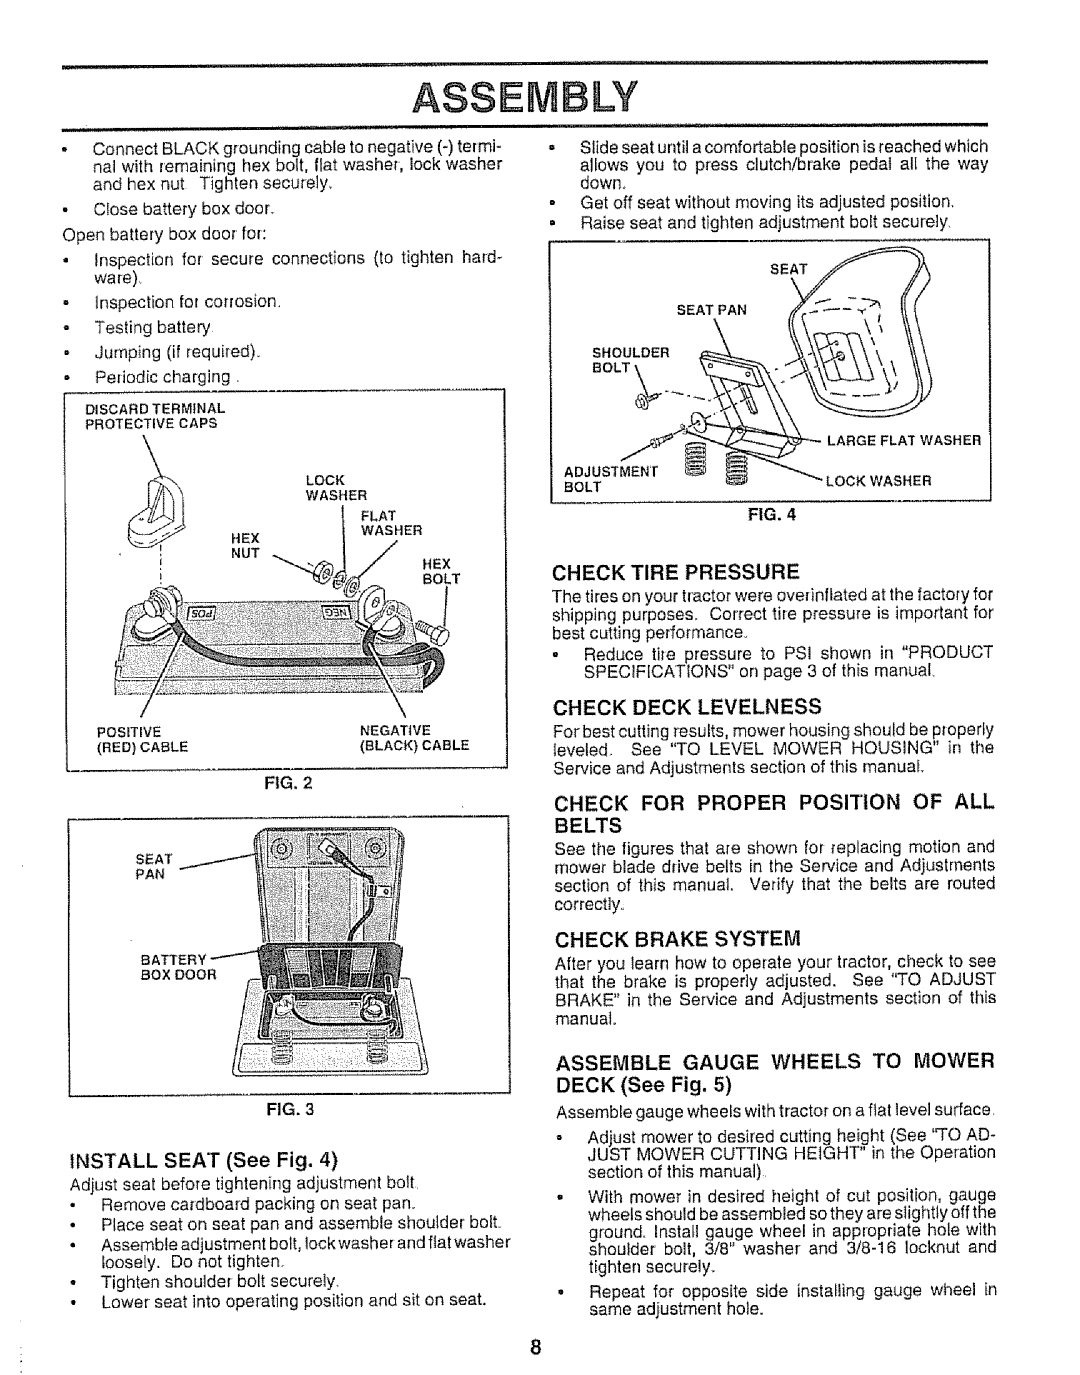 Sears 917.25953 owner manual Asse, INSTALL SEAT See Fig, Check Tire Pressure, Check Deck Levelness, Check Brake System 